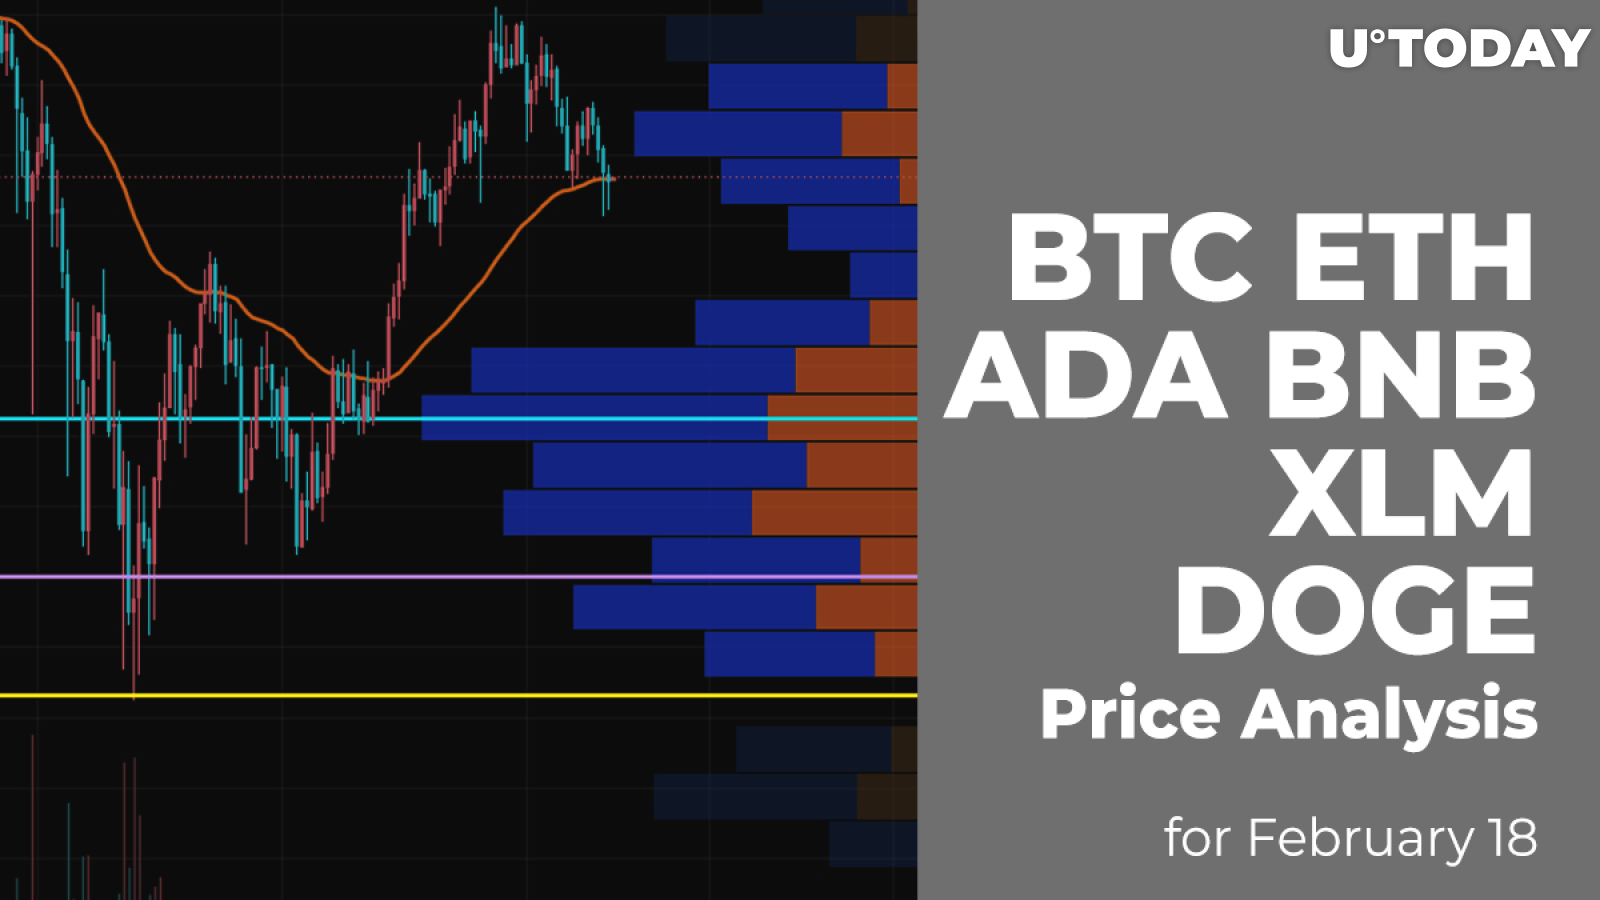 BTC, ETH, ADA, BNB, XLM and DOGE Price Analysis for February 18